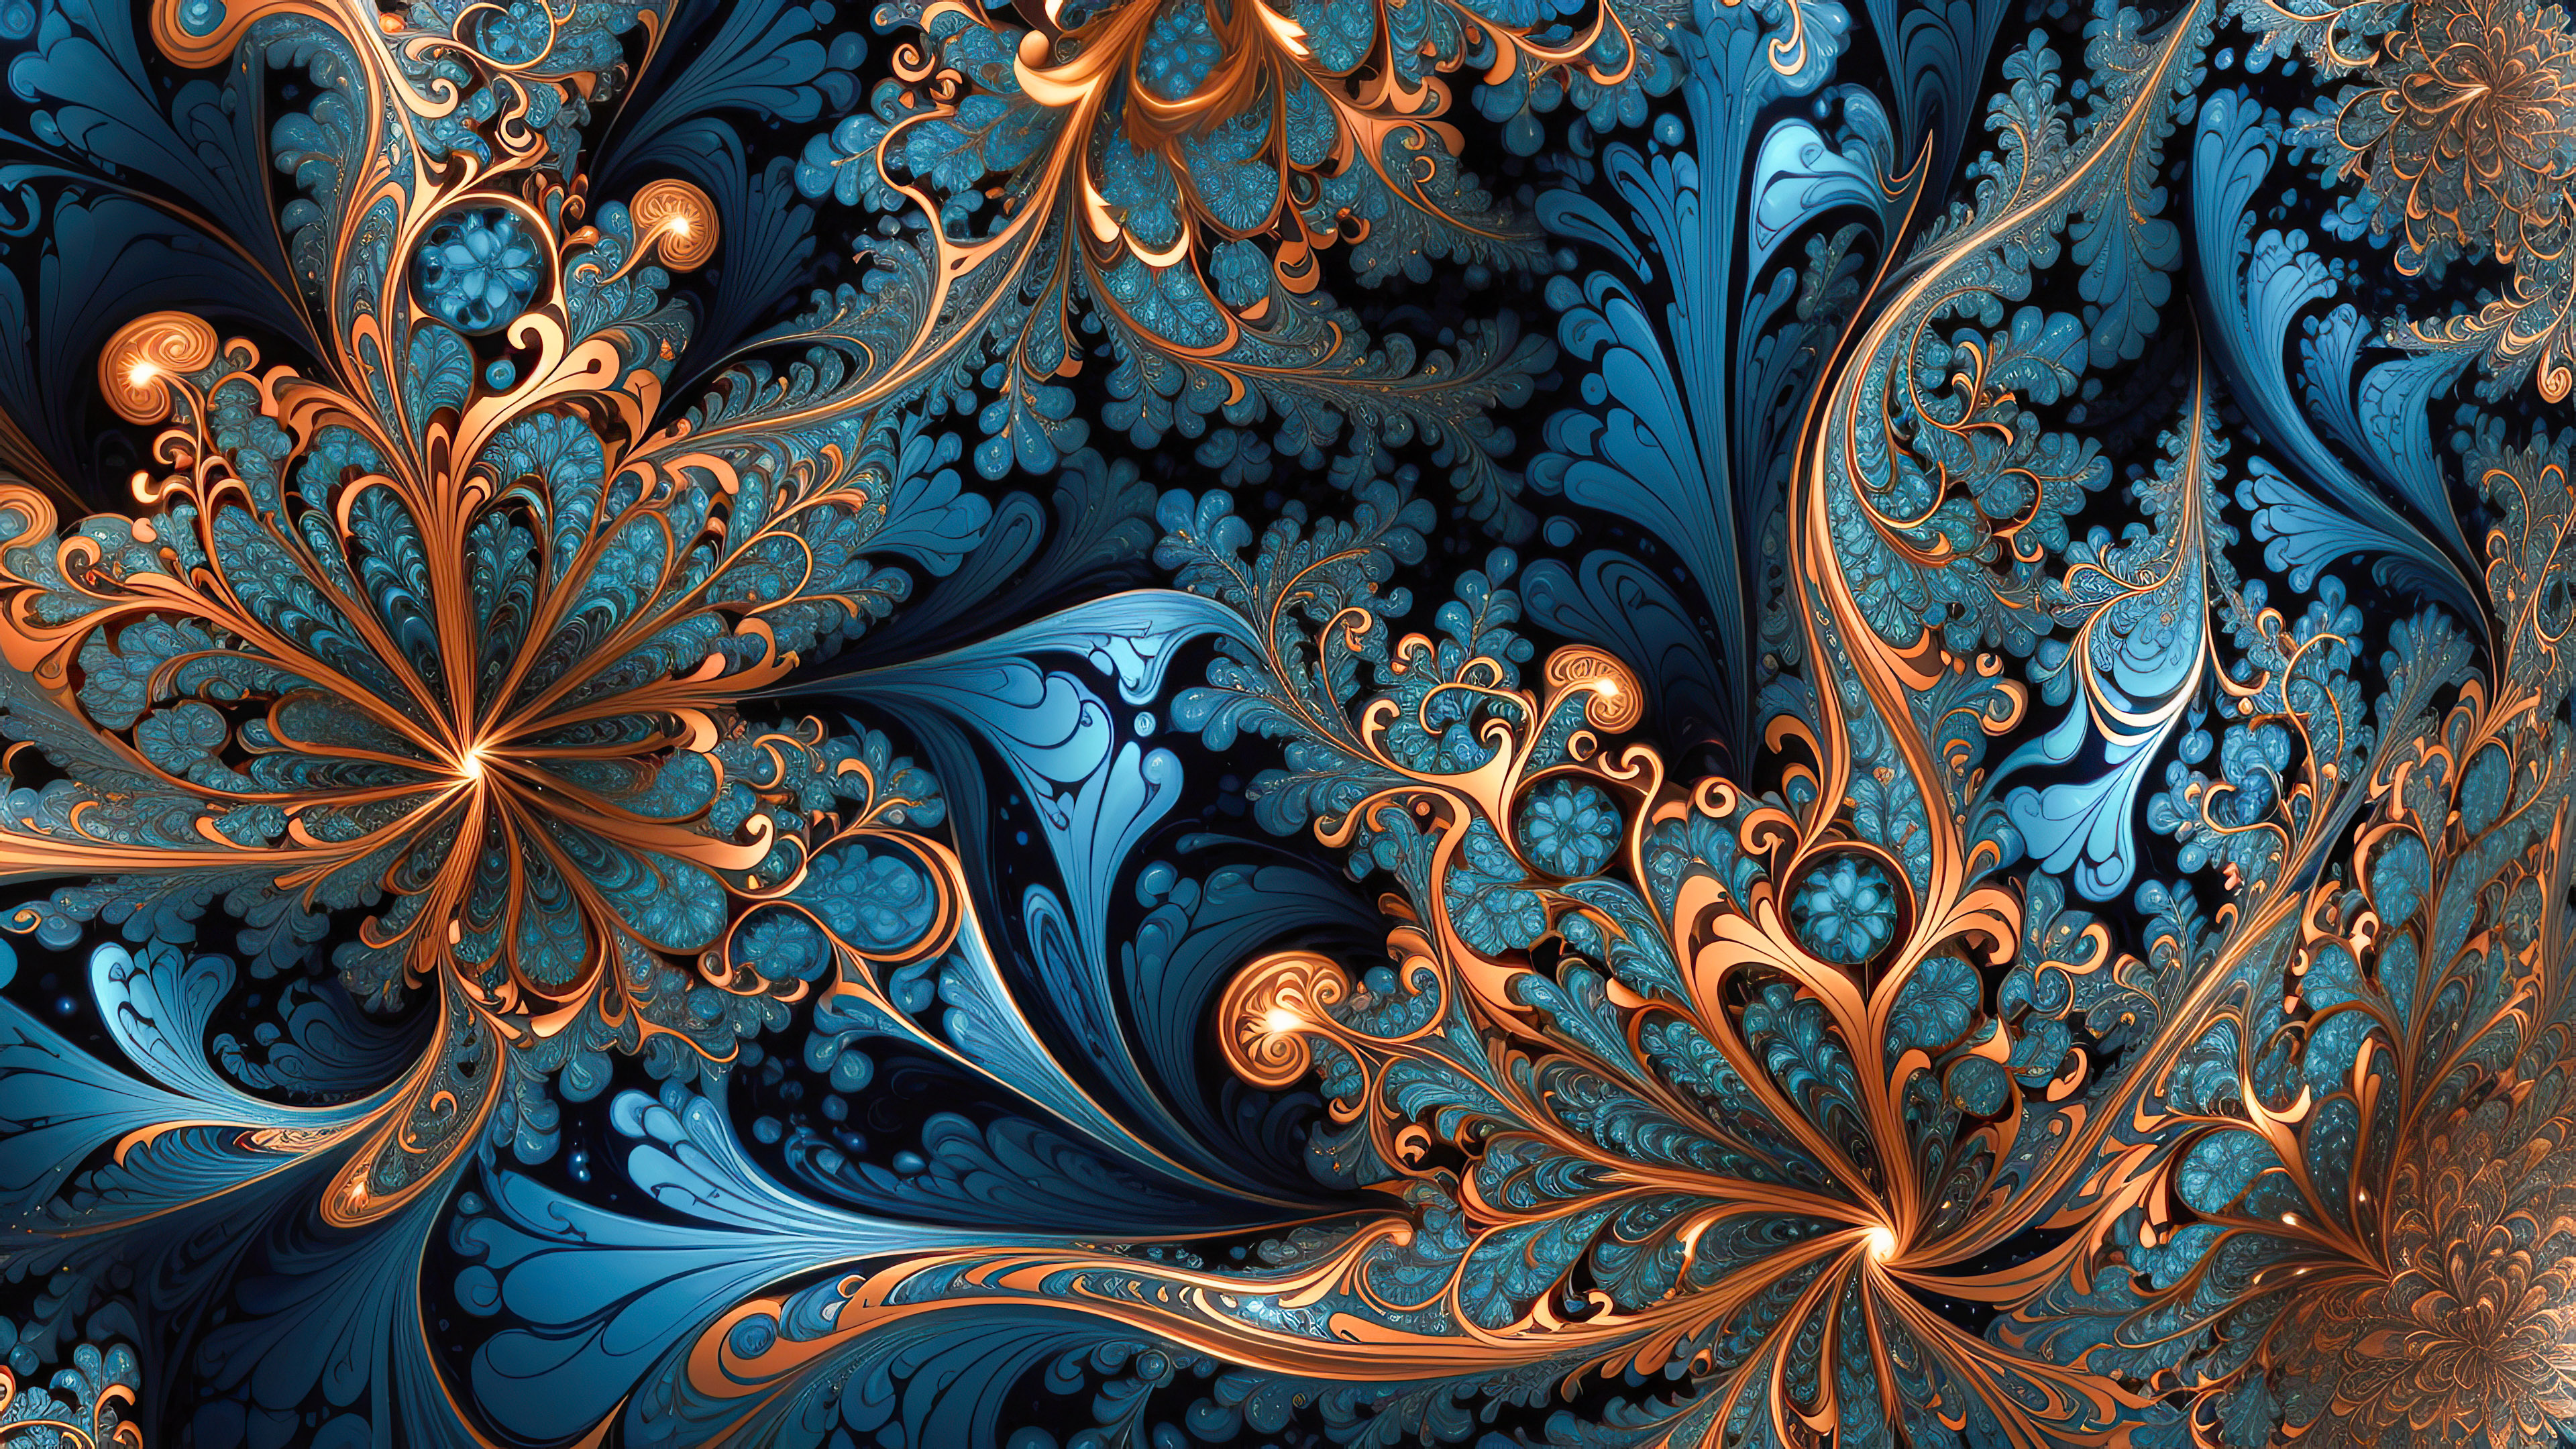 Indulge in visual intricacy with our 4k abstract wallpaper, featuring repeat fractal patterns that captivate the eye and showcase the marriage of precision and artistry.